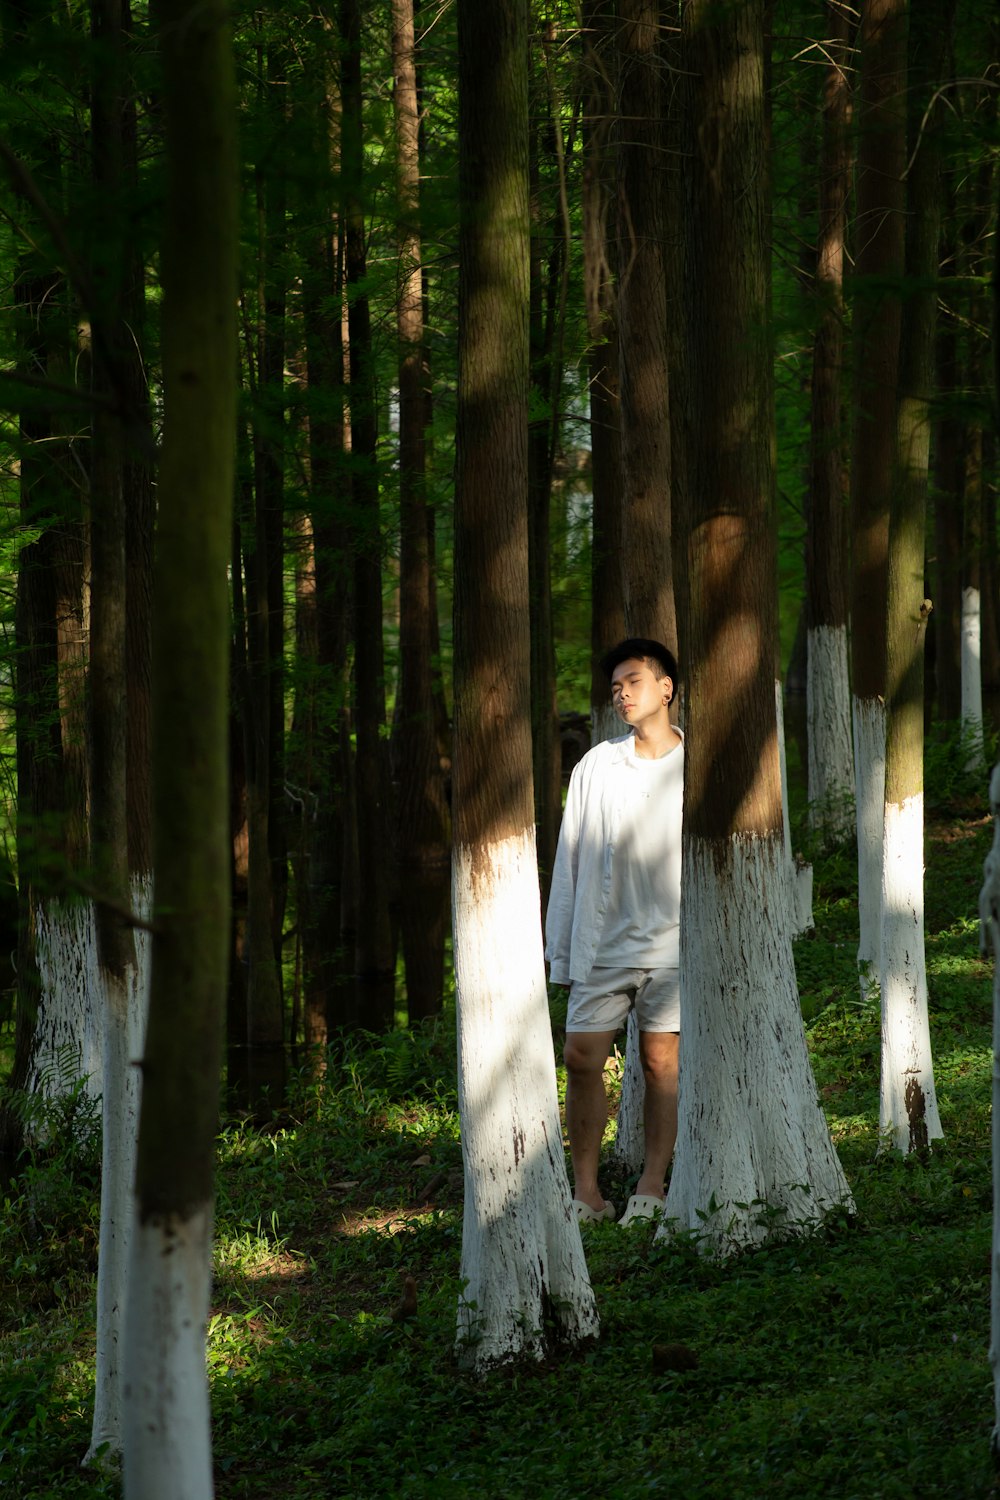 a man standing between two trees in a forest